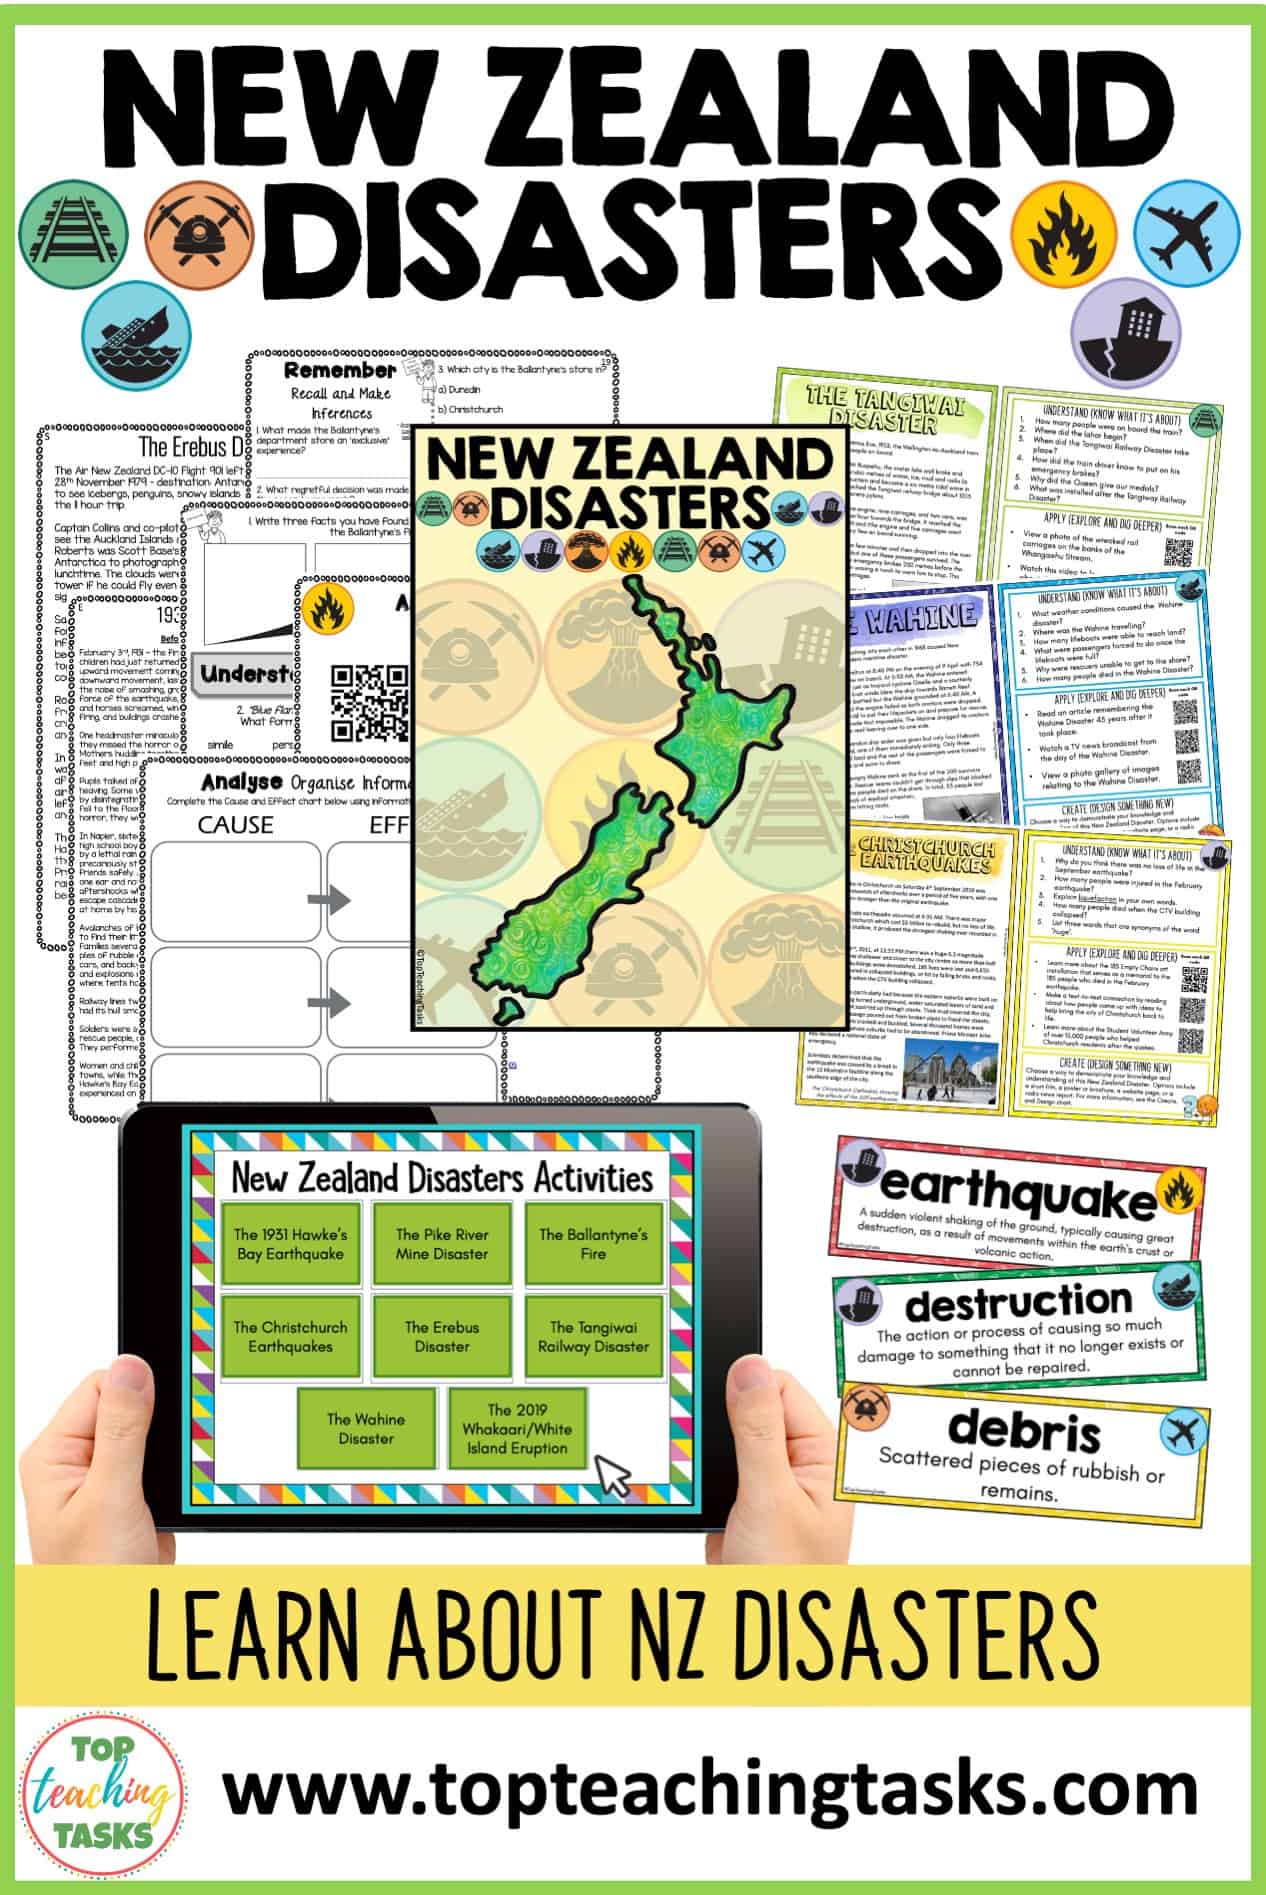 New Zealand Disasters. Explore some of the most devastating disasters in New Zealand's history. In this New Zealand Disasters Unit, students will learn about eight historic and recent disasters and their effect upon Aotearoa. Through a range of activity options, students will extend their knowledge of these events, apply this knowledge by exploring digital links, and put their own design skills to the test with creative challenges. Passages are included for a range of ability levels so this resource can work with Year 4 to Year 8 and to provide differentiation.